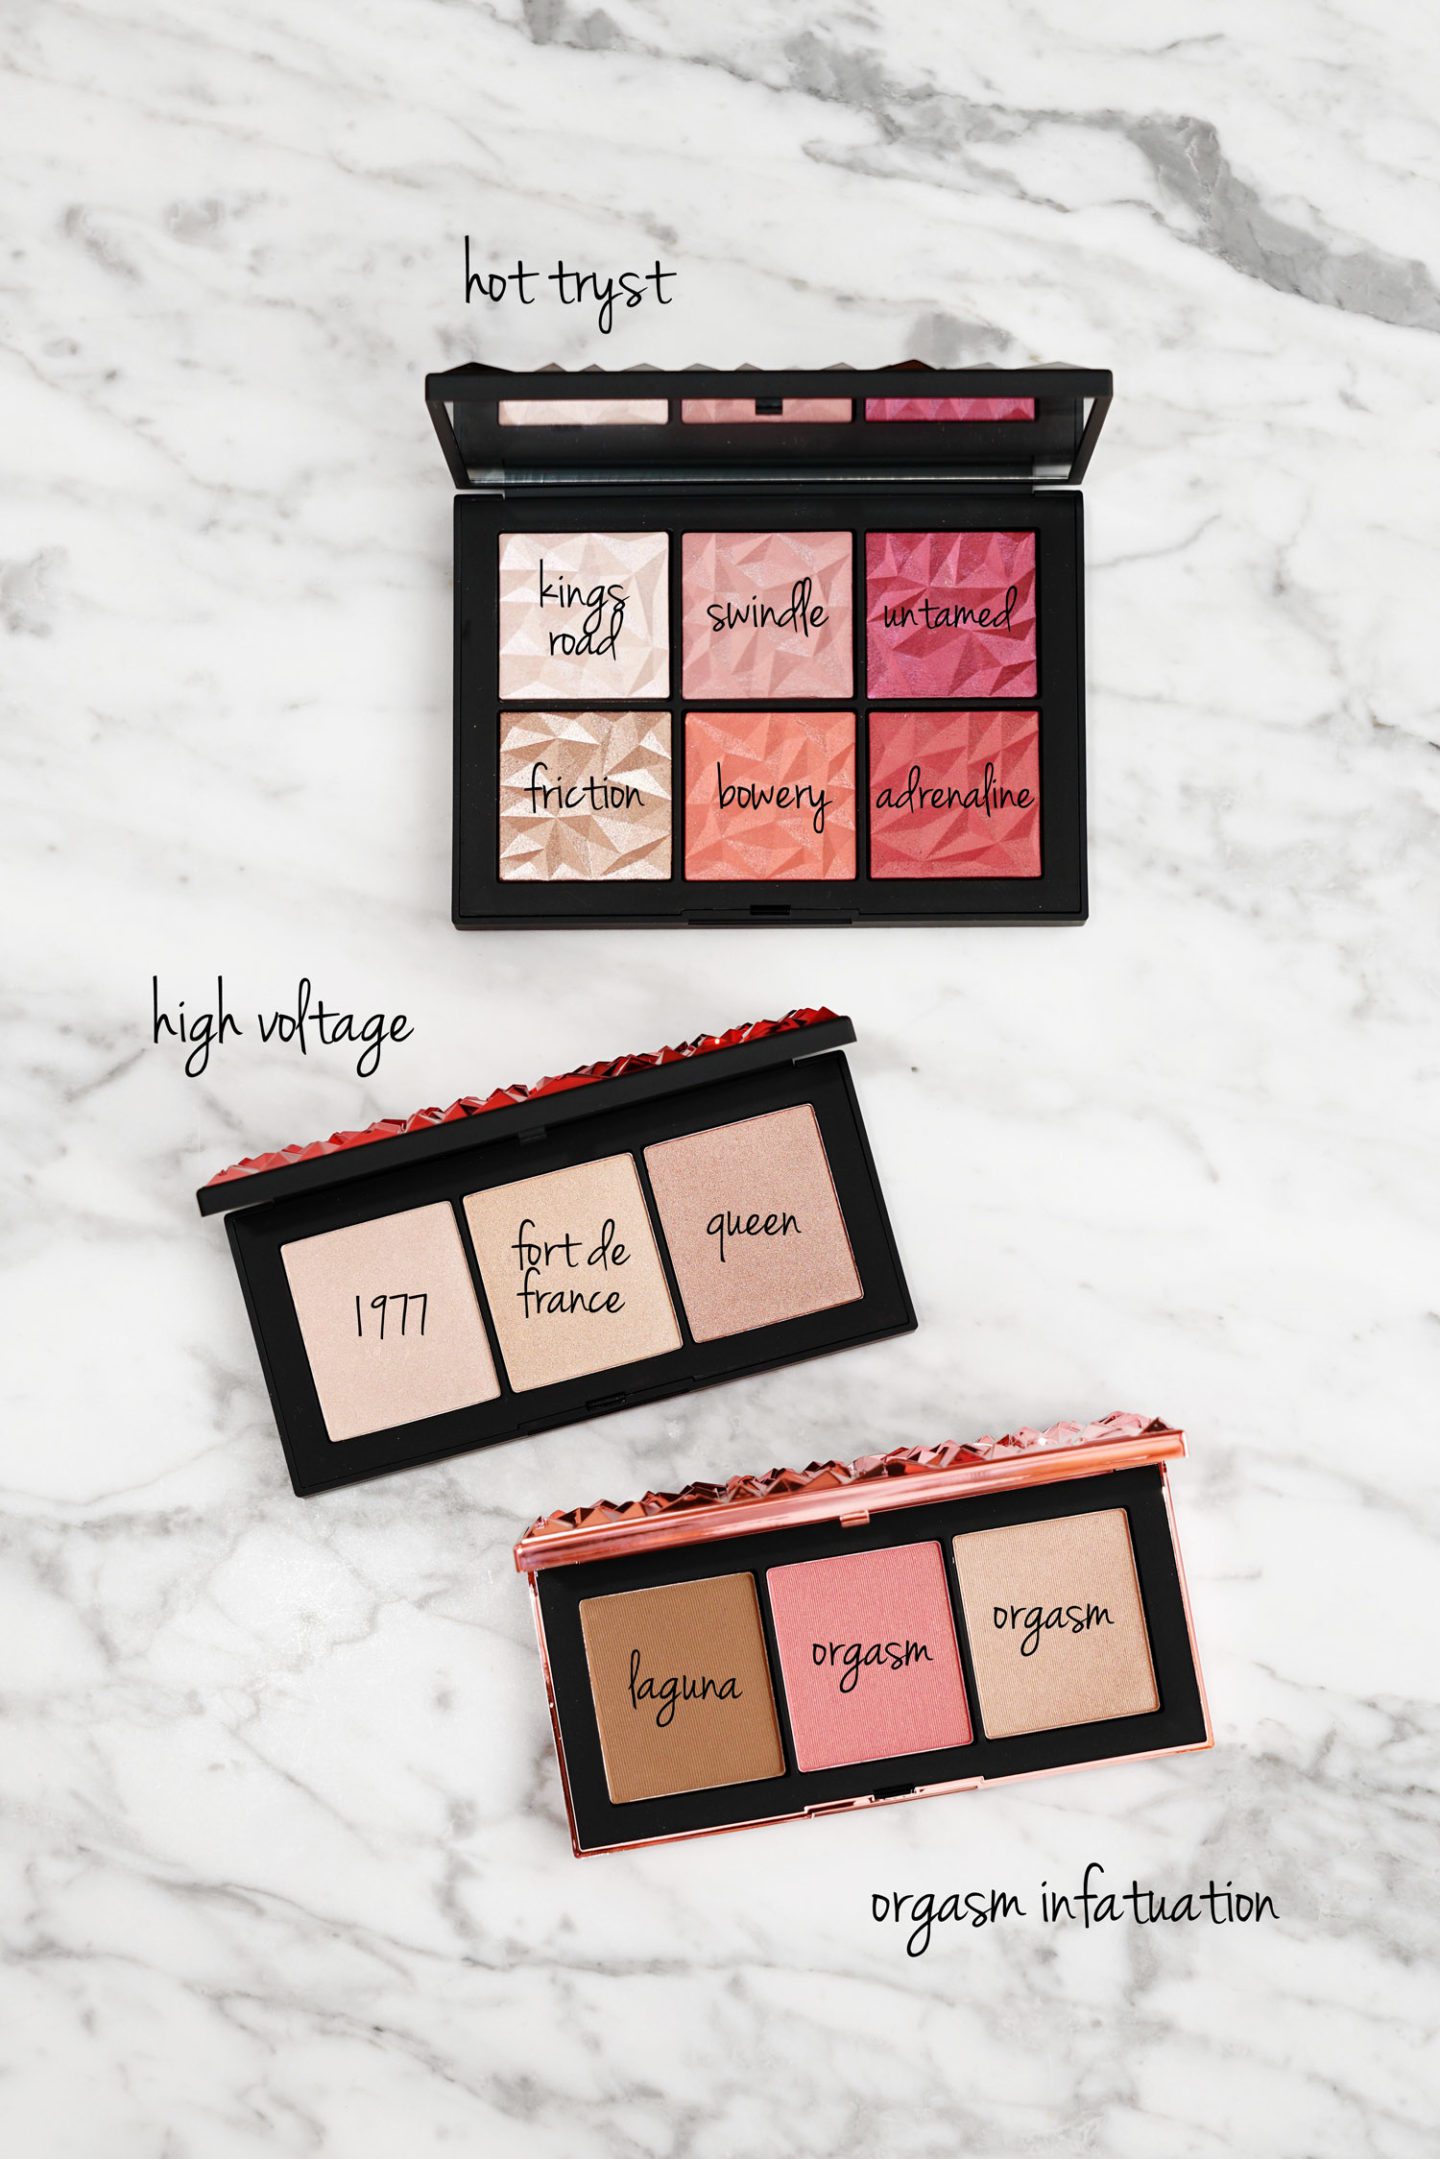 NARS Holiday 2018 Hot Tryst, High Voltage and Orgasm Infatuation Cheek Palettes